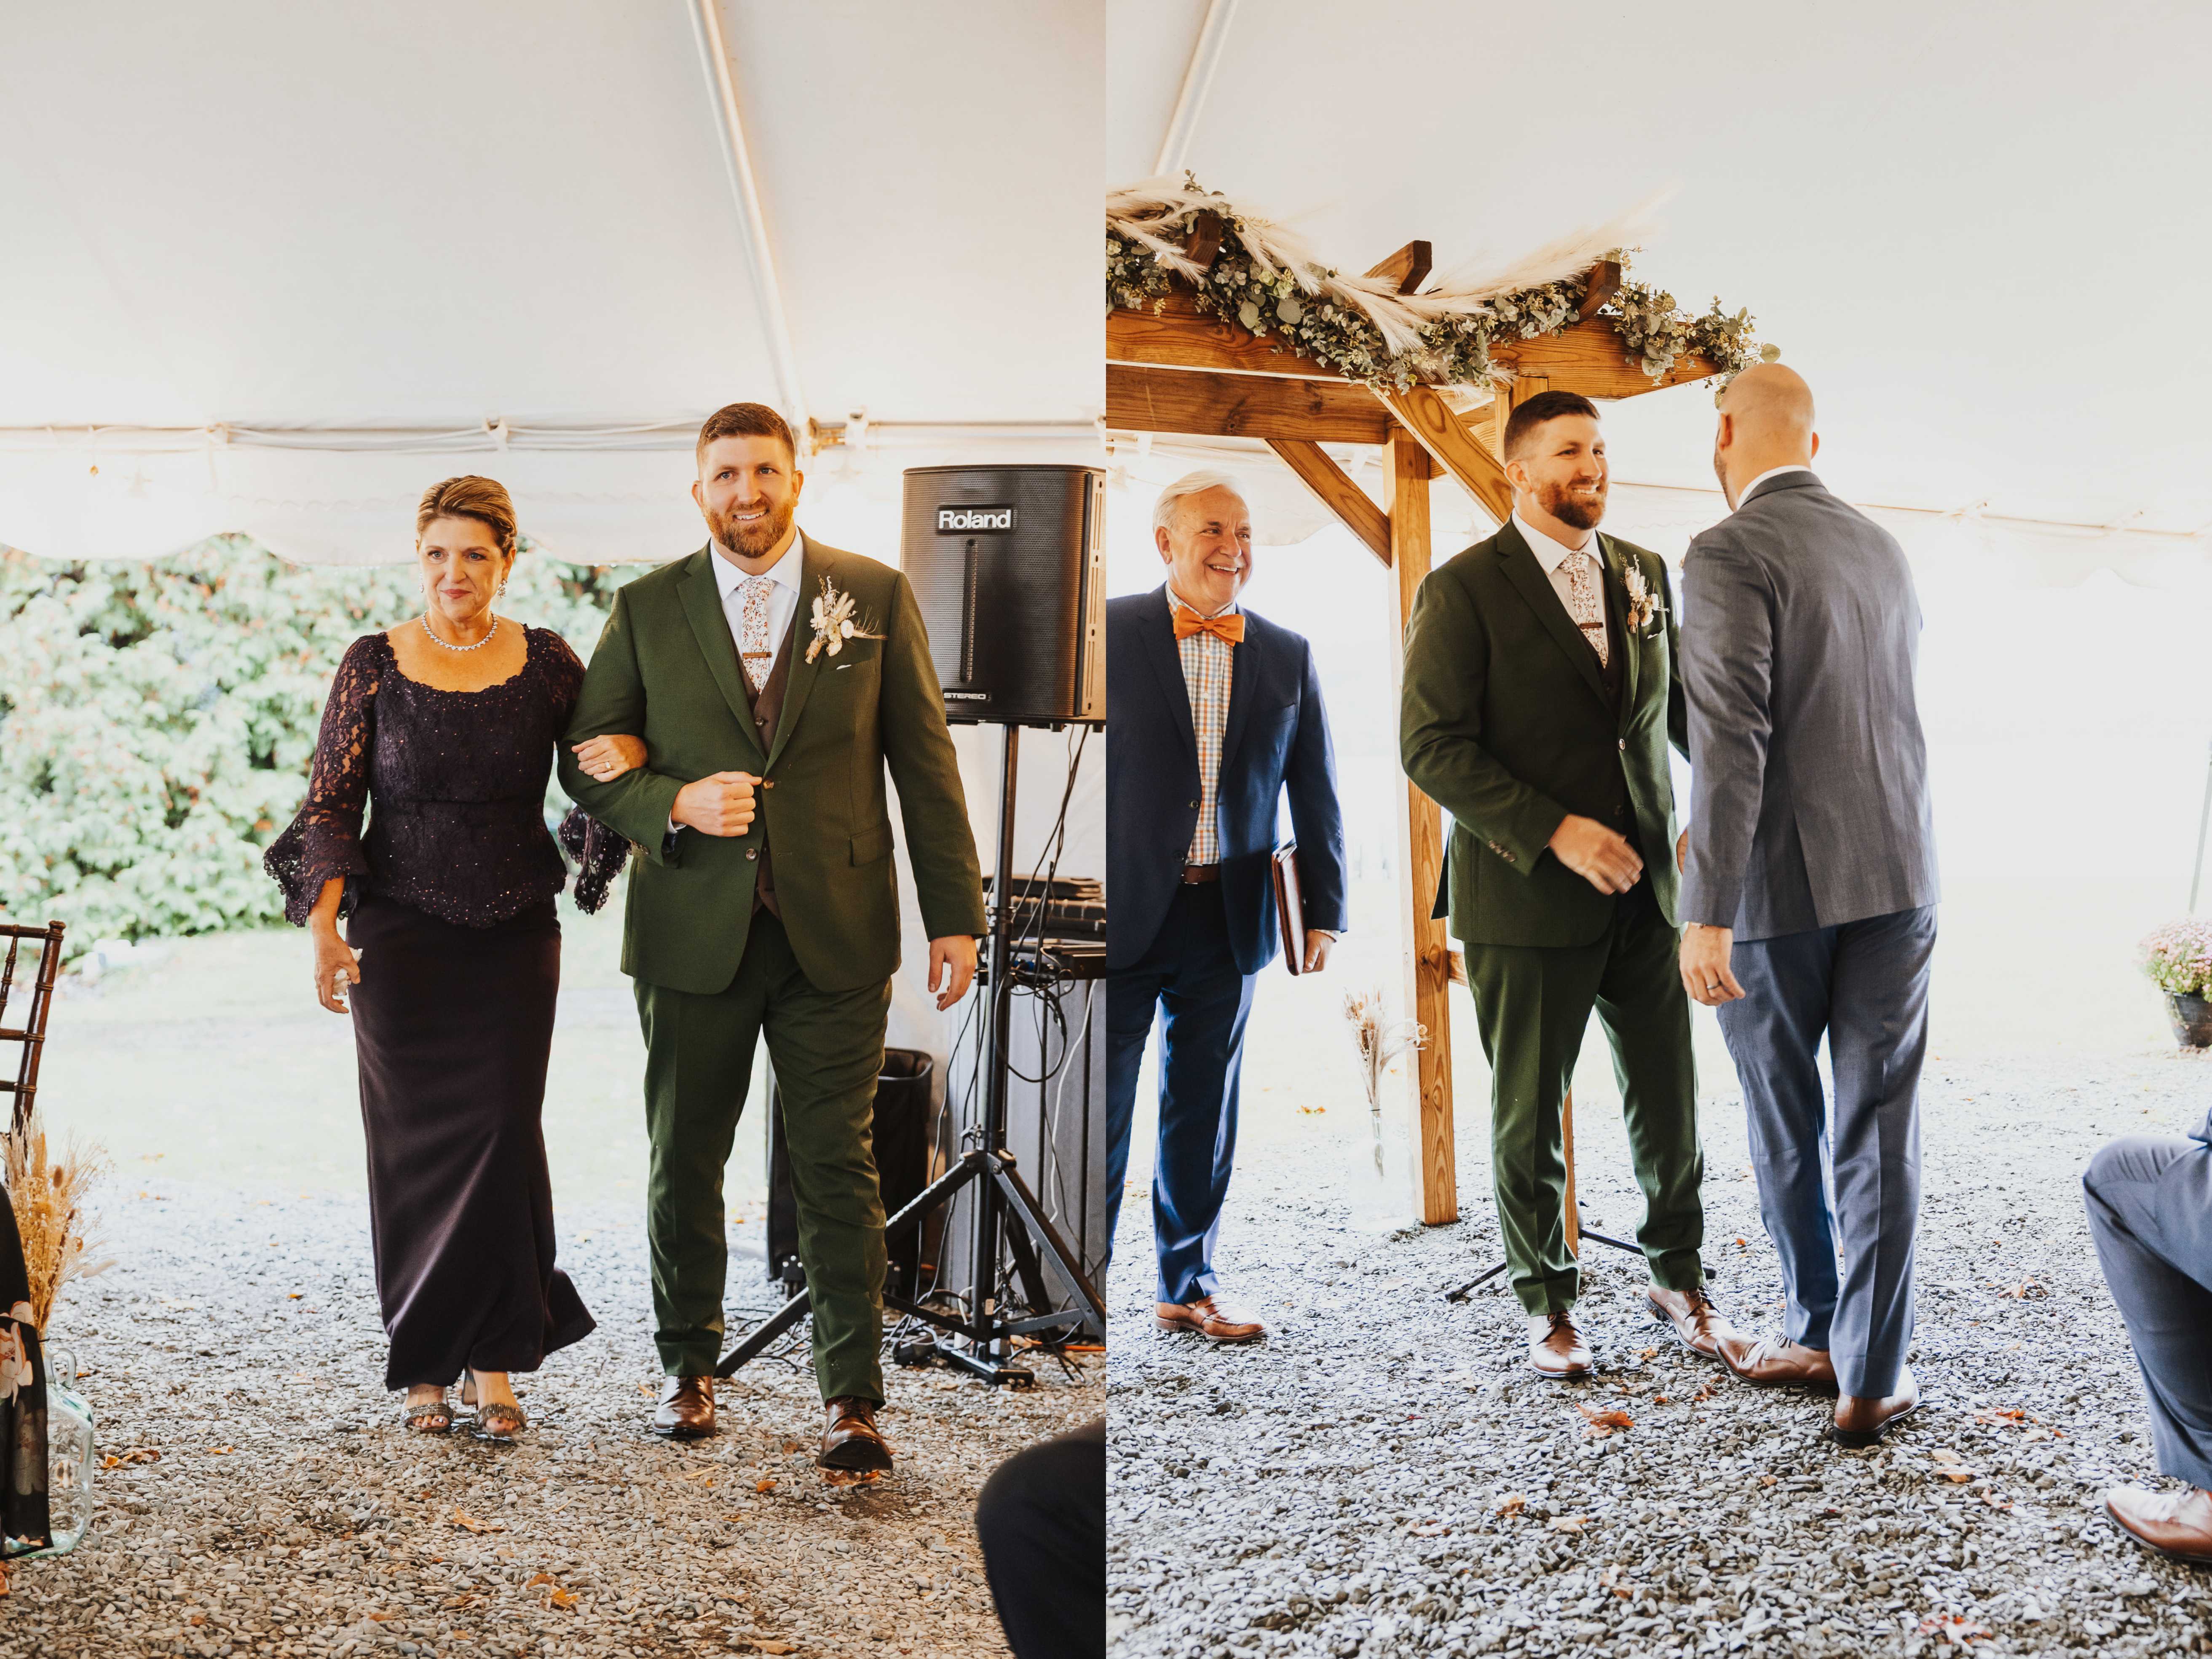 2 photos side by side, the left is of a groom walking down the aisle of his wedding ceremony while being escorted by his mother, the right is of the groom shaking hands with one of his groomsmen while at the altar